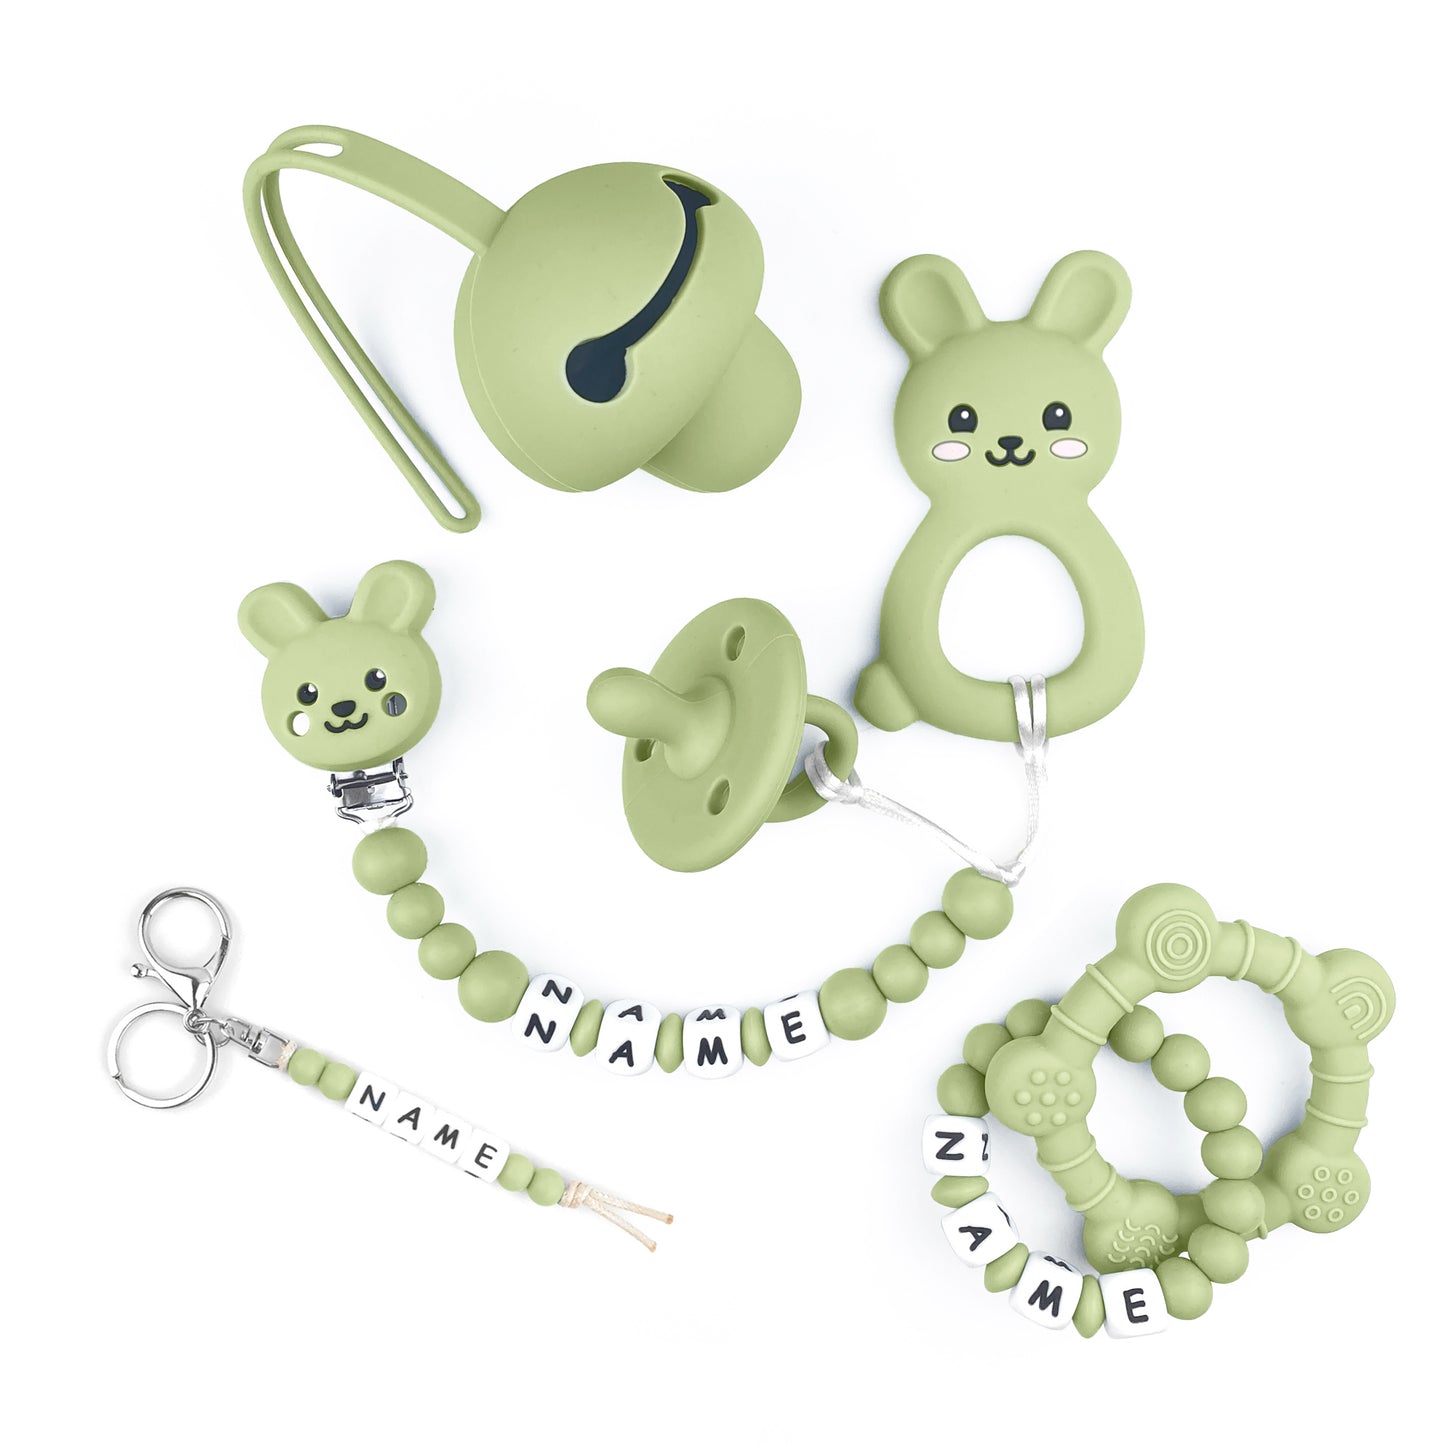 Customized Chain With Pacifier, Teether, Key Chain, Ring Teether, & Pacifier Case